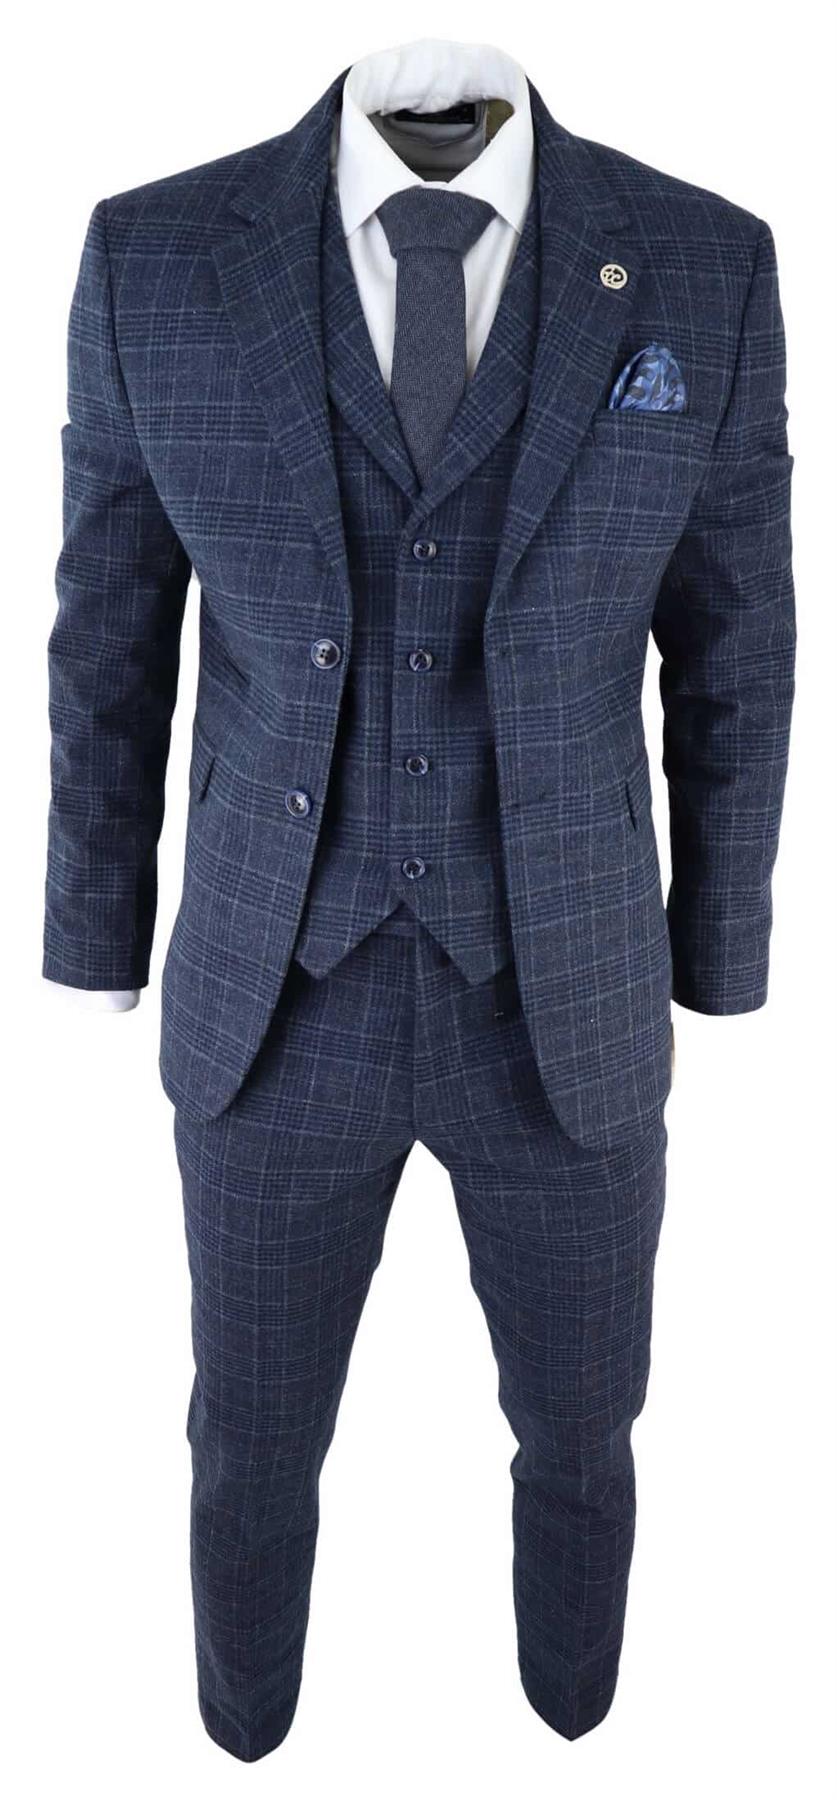 Mens Blue Check 3 Piece Tweed Suit Peaky Blinders 1920s Gatsby Tailored Fit - Upperclass Fashions 